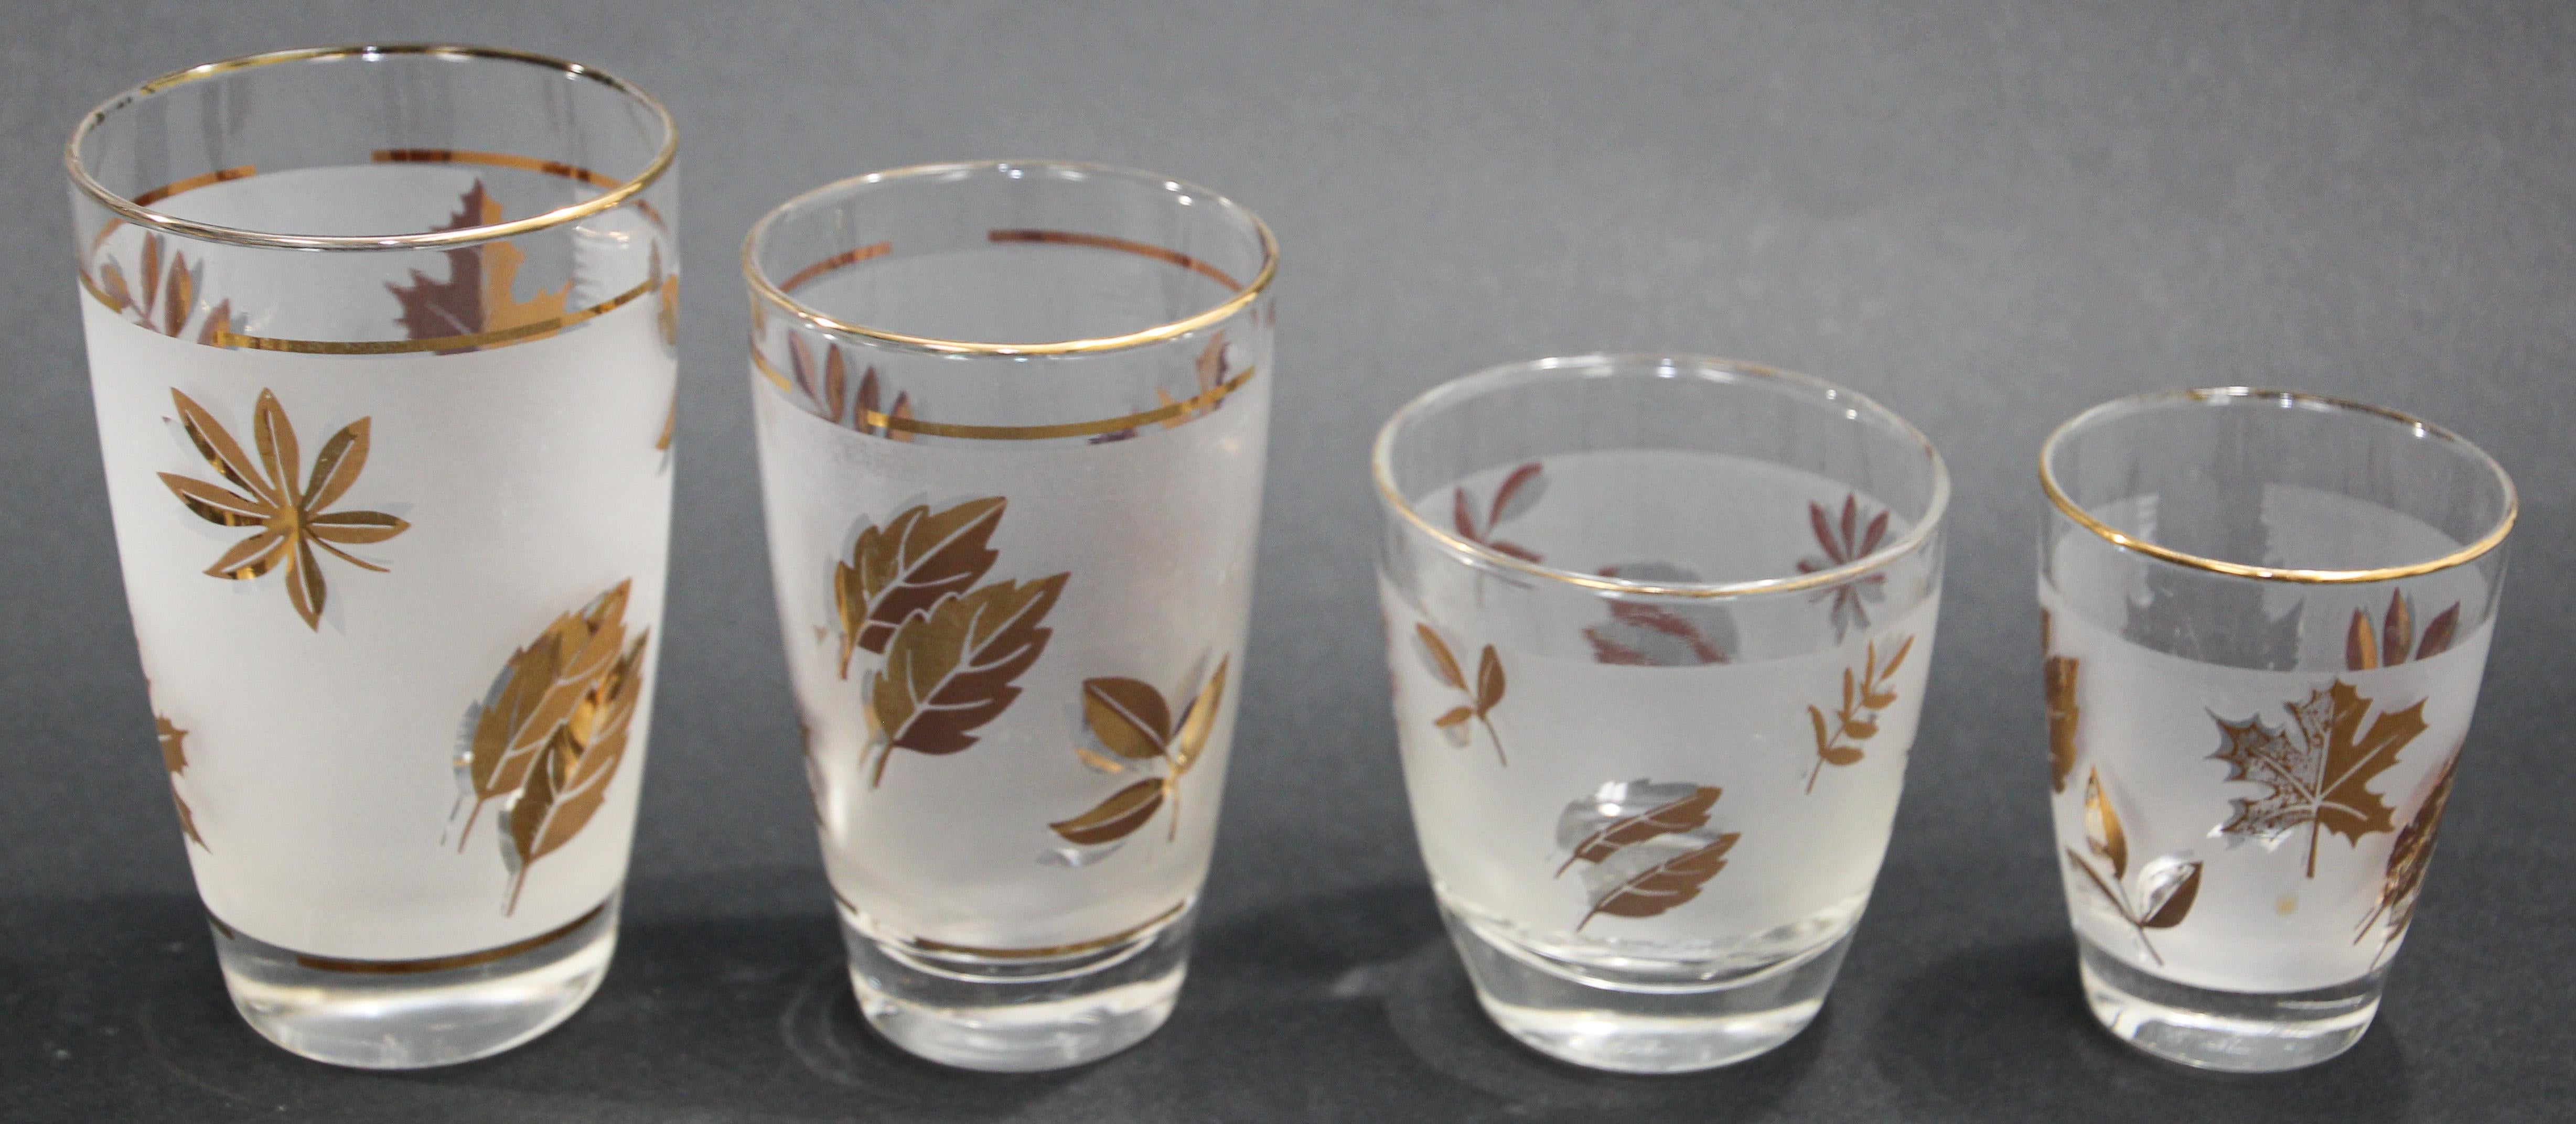 American Vintage Midcentury Libbey Set of 13 Frosted and Golden Foliage Cocktail Glasses